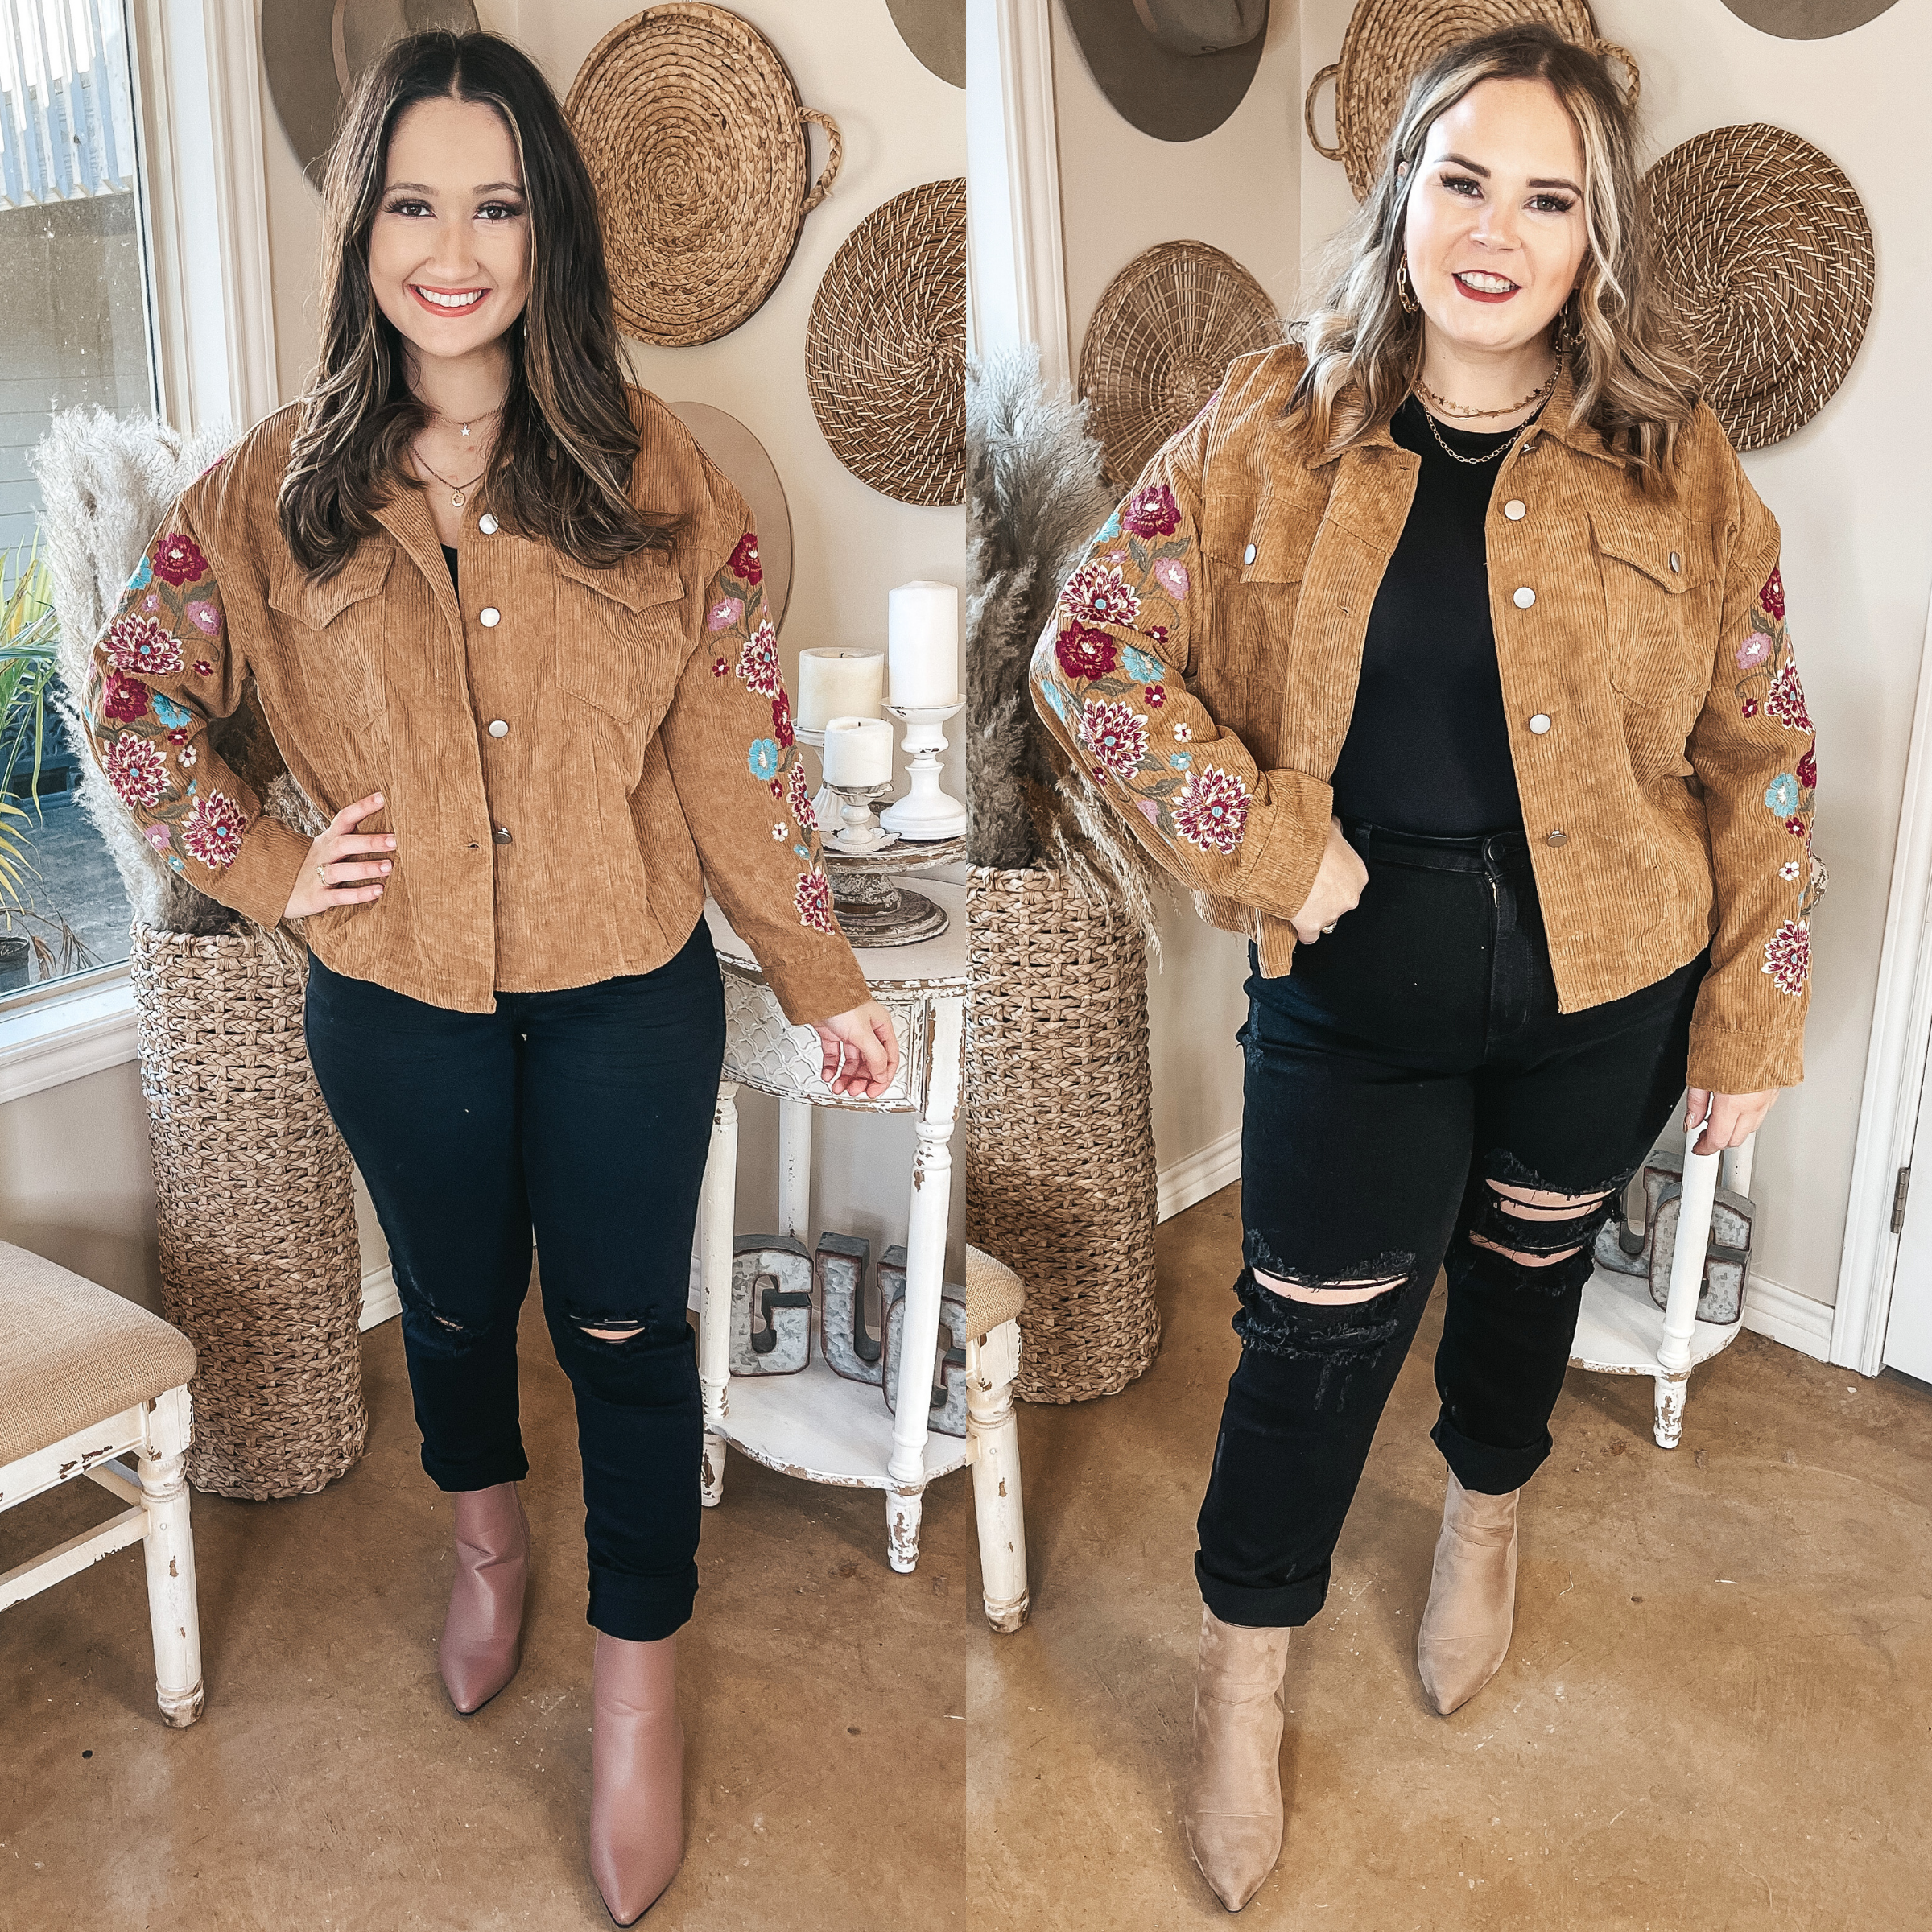 Models are wearing a tan button up corduroy jacket. The sleeves of the jacket have floral embroidery. Models have it paired with black tank top, black skinny jeans, taupe booties, and gold jewelry.